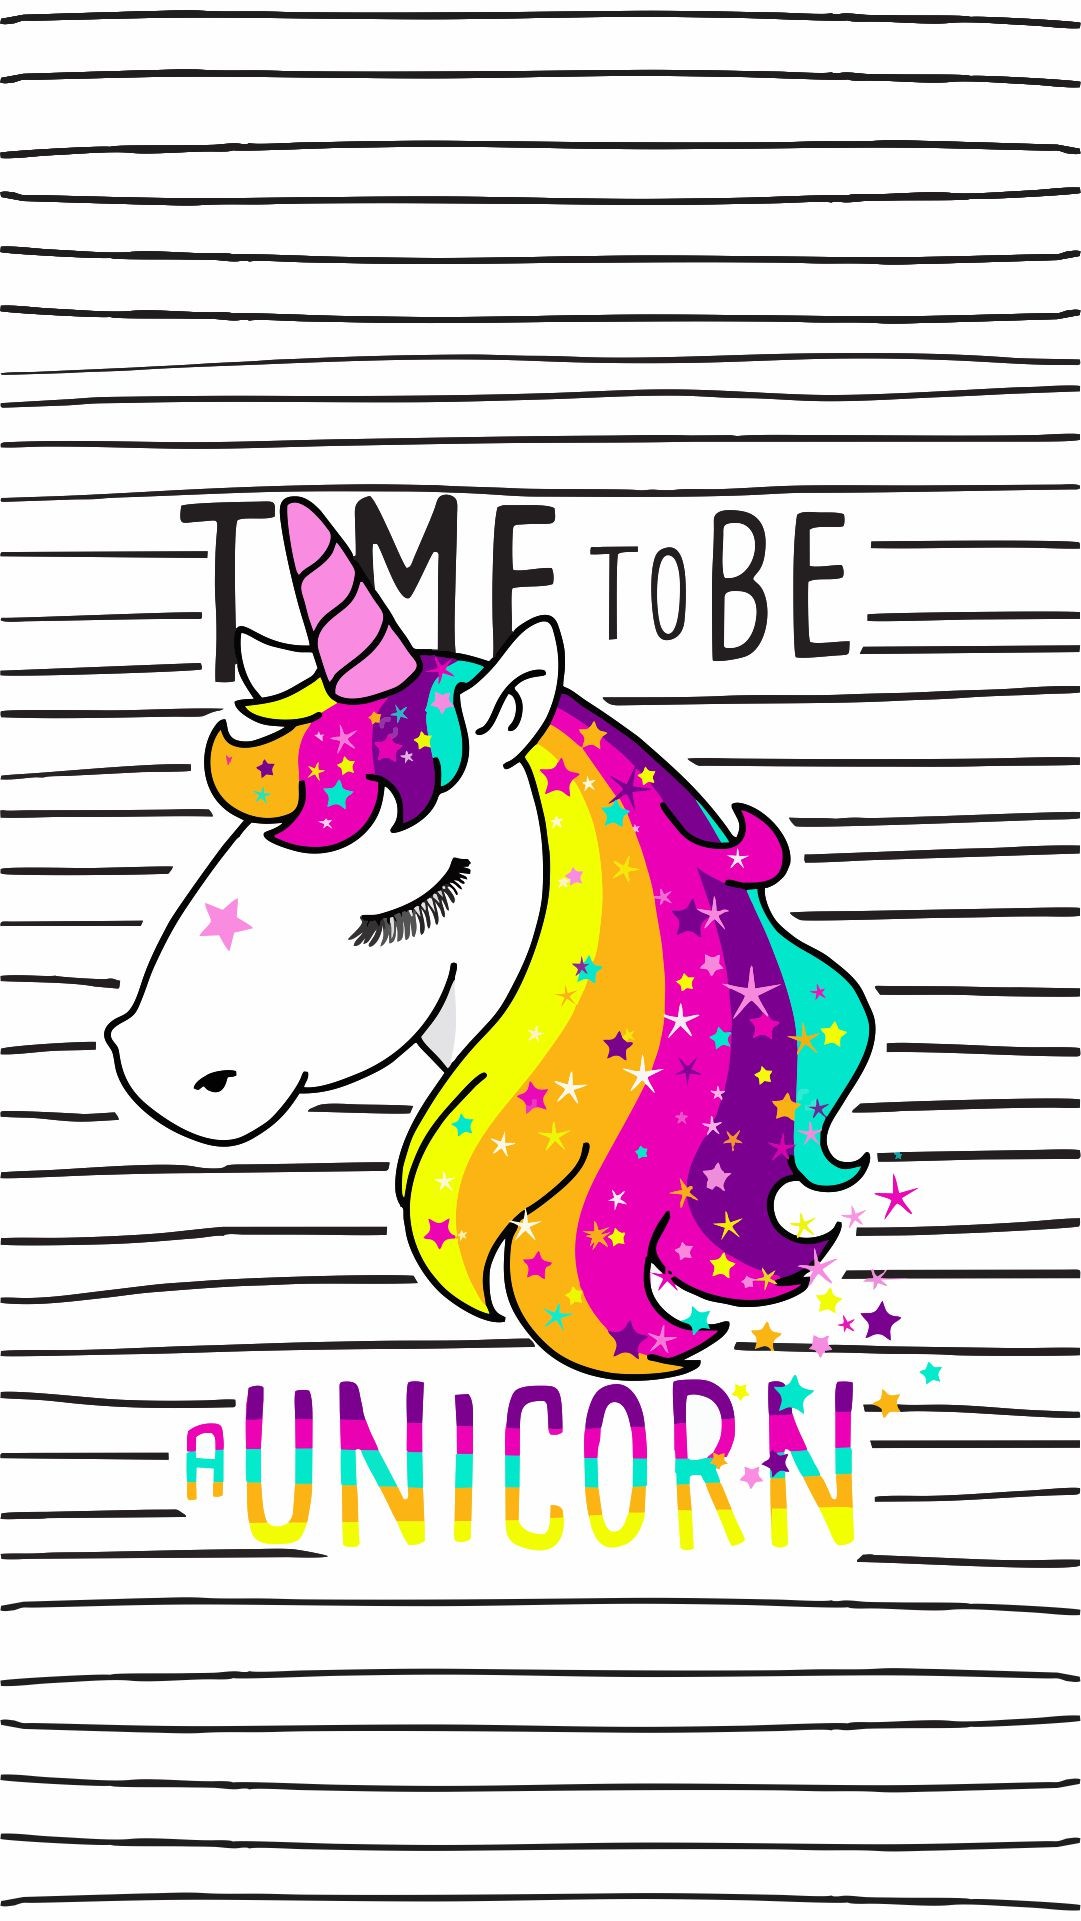 Time to be unicorn